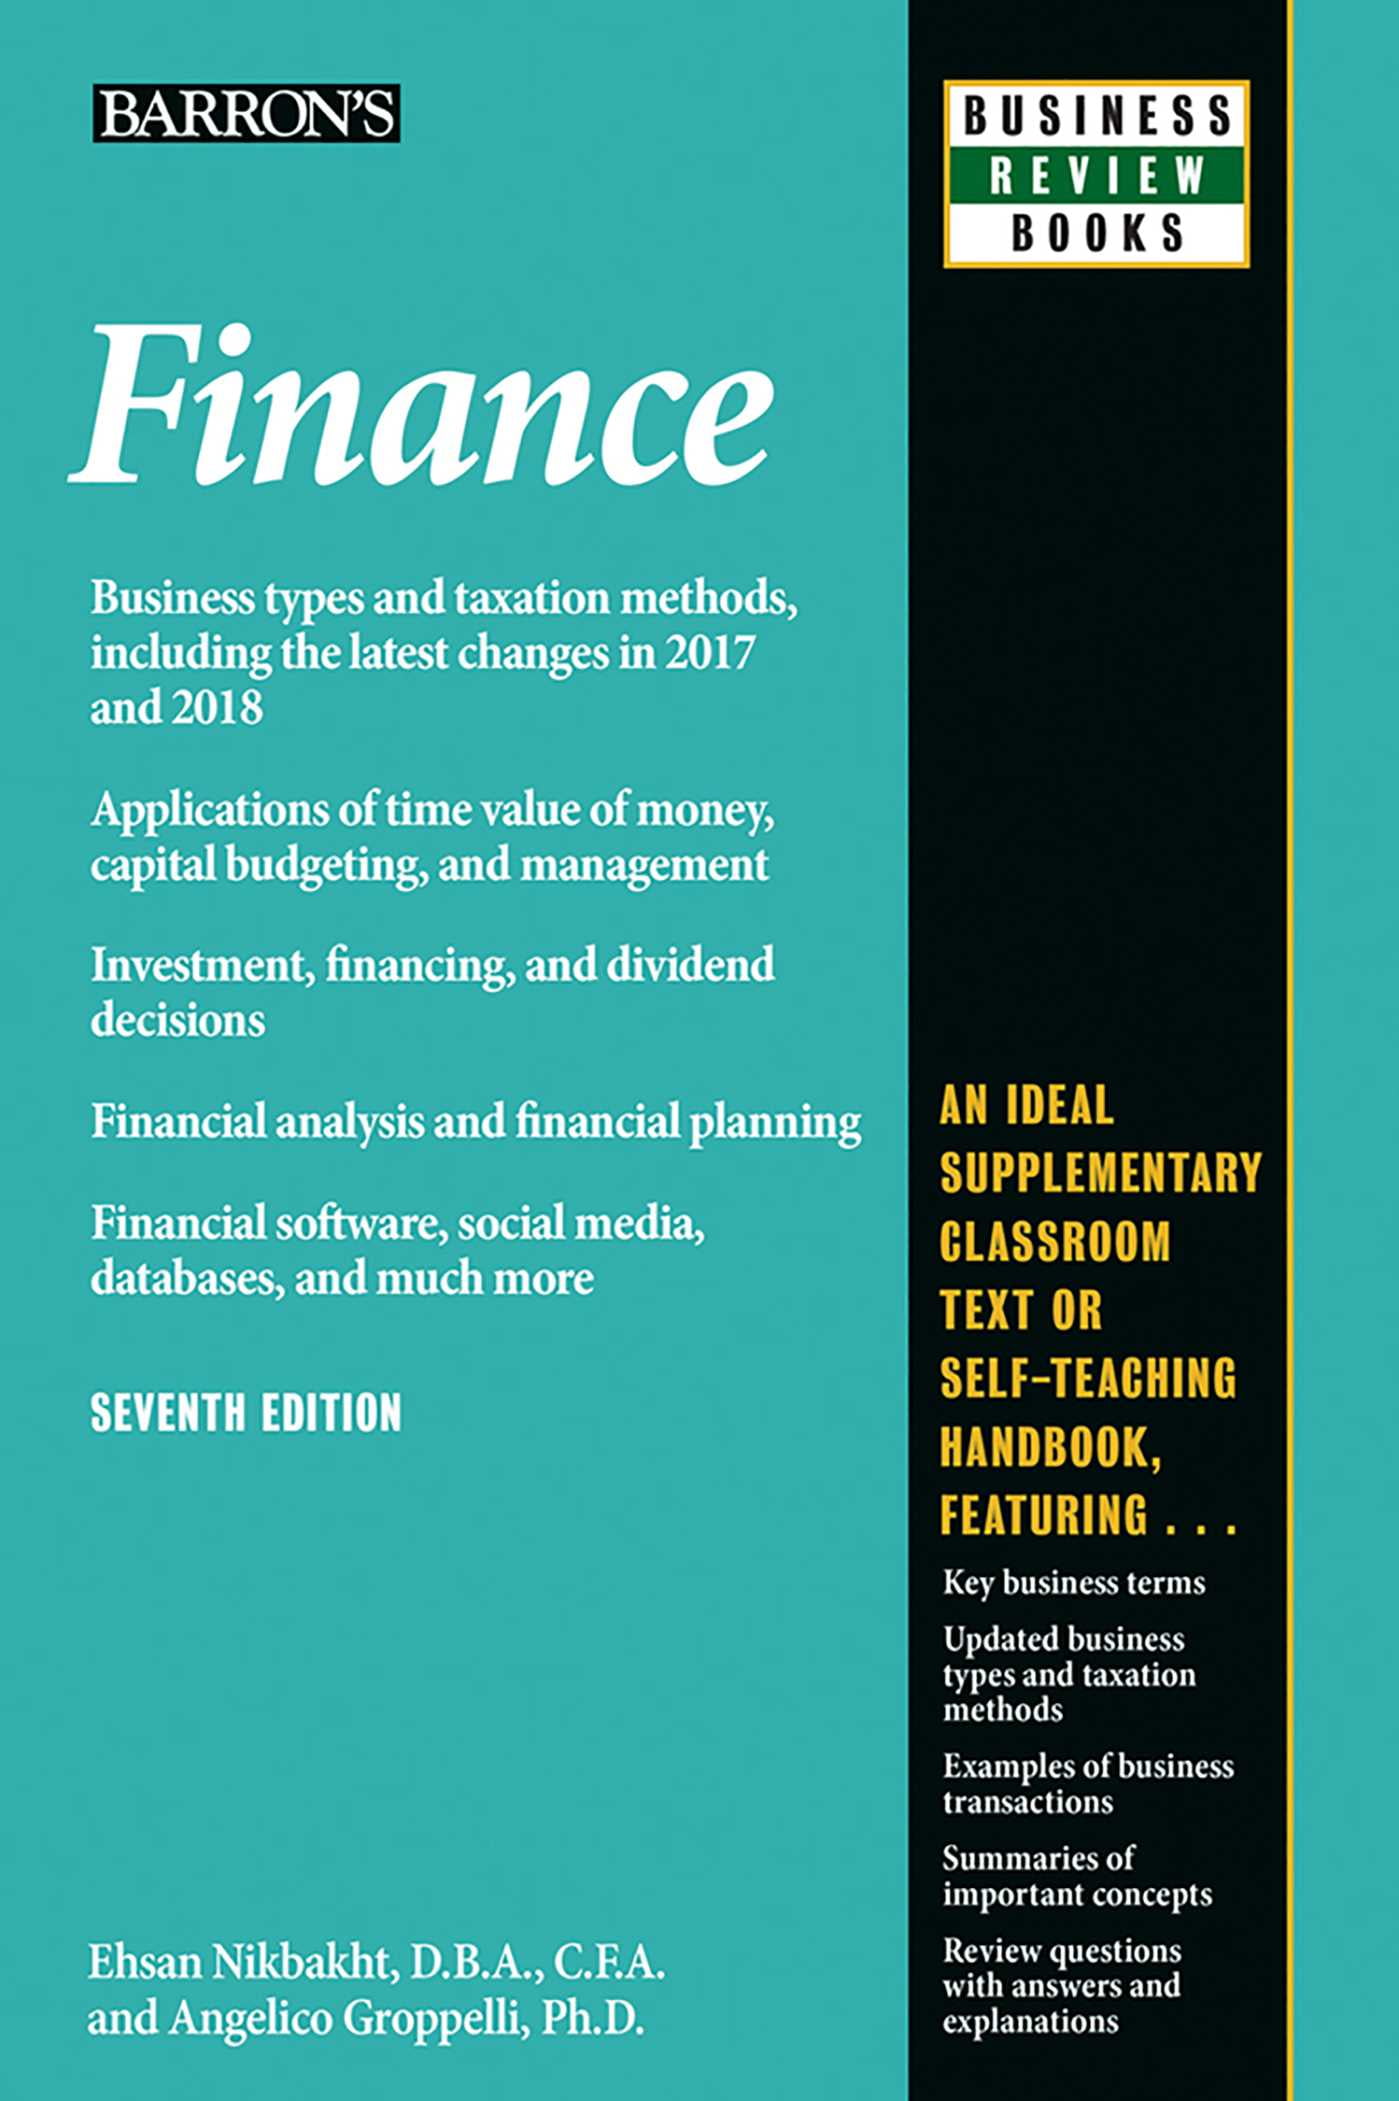 Methods including. Taxation methods. Finance book. Business statistics Fifth Edition Barrons book. Business statistics Fifth Edition Barrons book Robert.